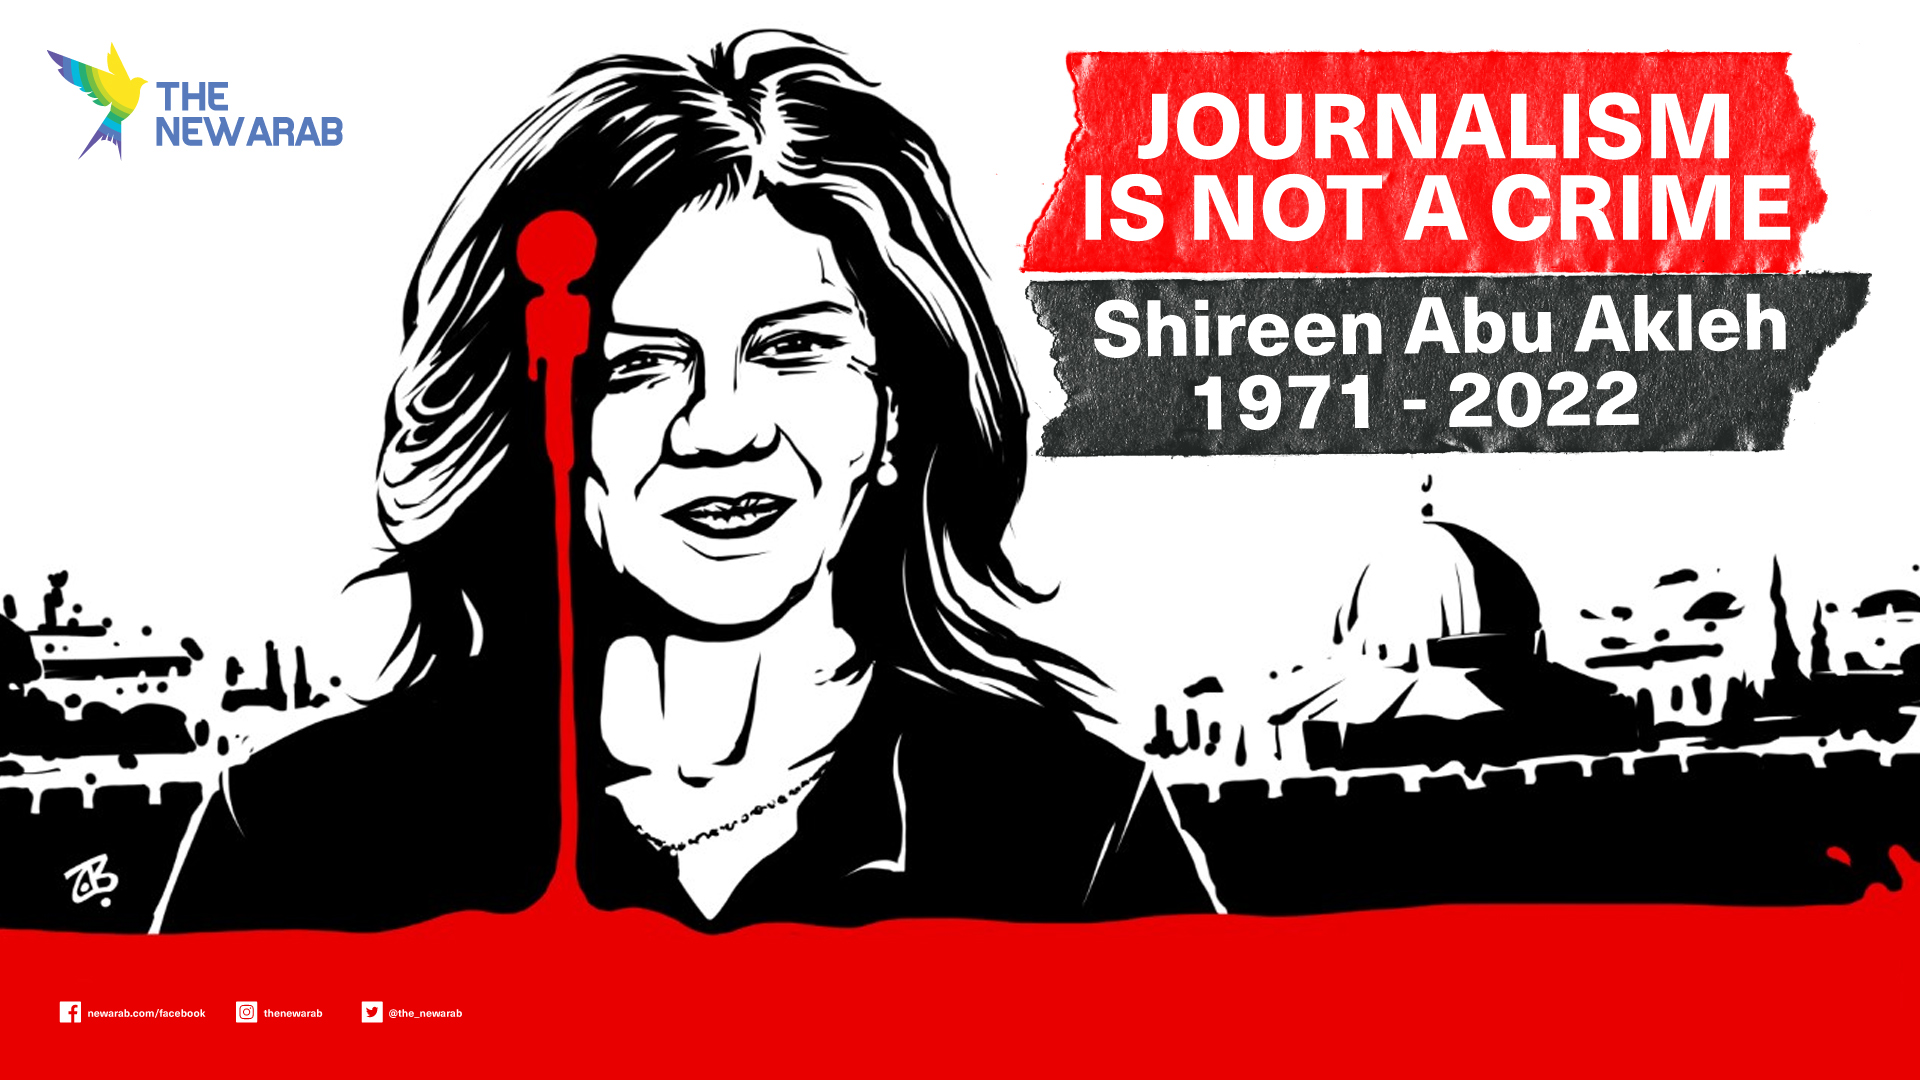 An illustration of Palestinian journalist Shireen Abu Akleh with red dripping from her head. Abu Akleh was shot in the head by Israeli forces. The image also includes the text: "Journalism is not a crime. Shireen Abu Akleh, 1971-2022."